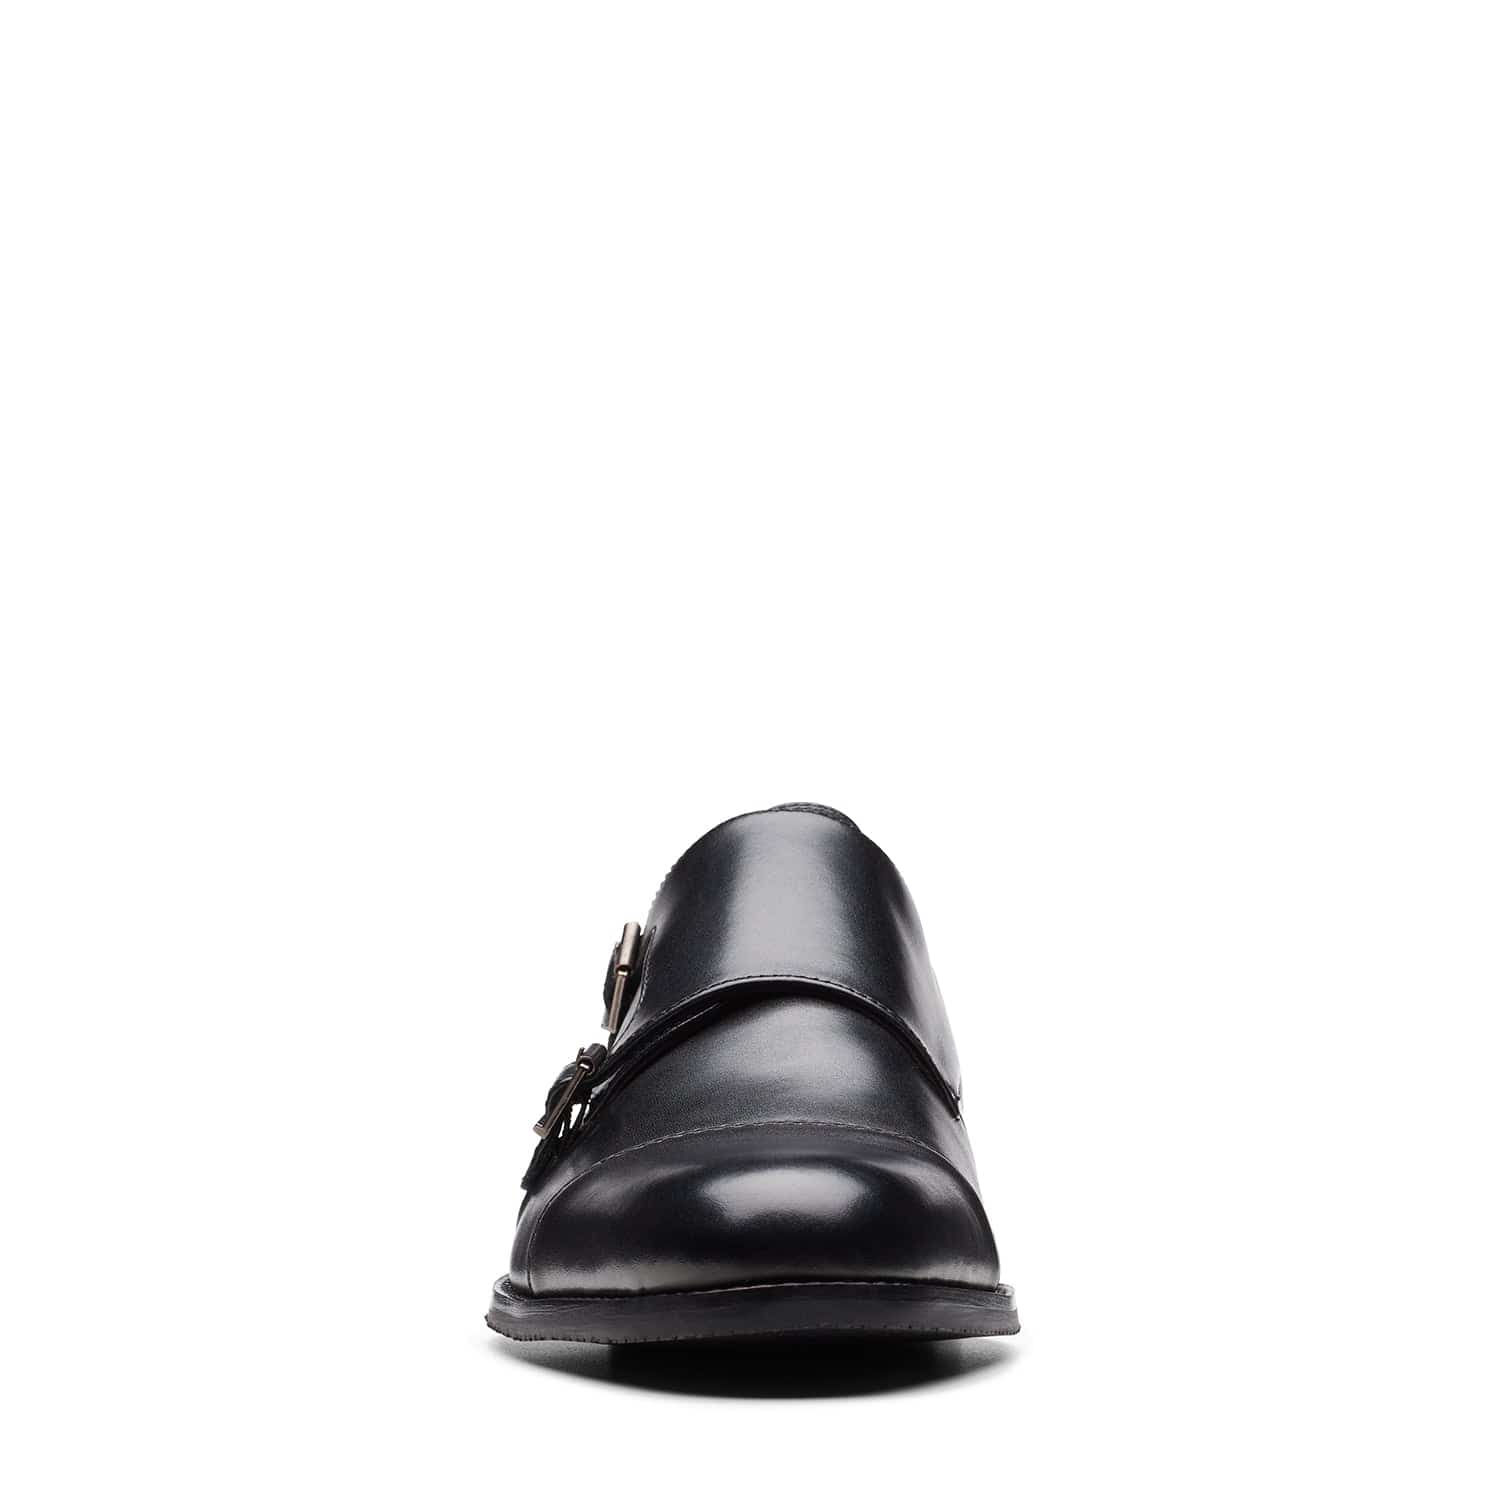 Clarks Craftarlo Monk - Shoes - Black Leather - 261724517 - G Width (Standard Fit)